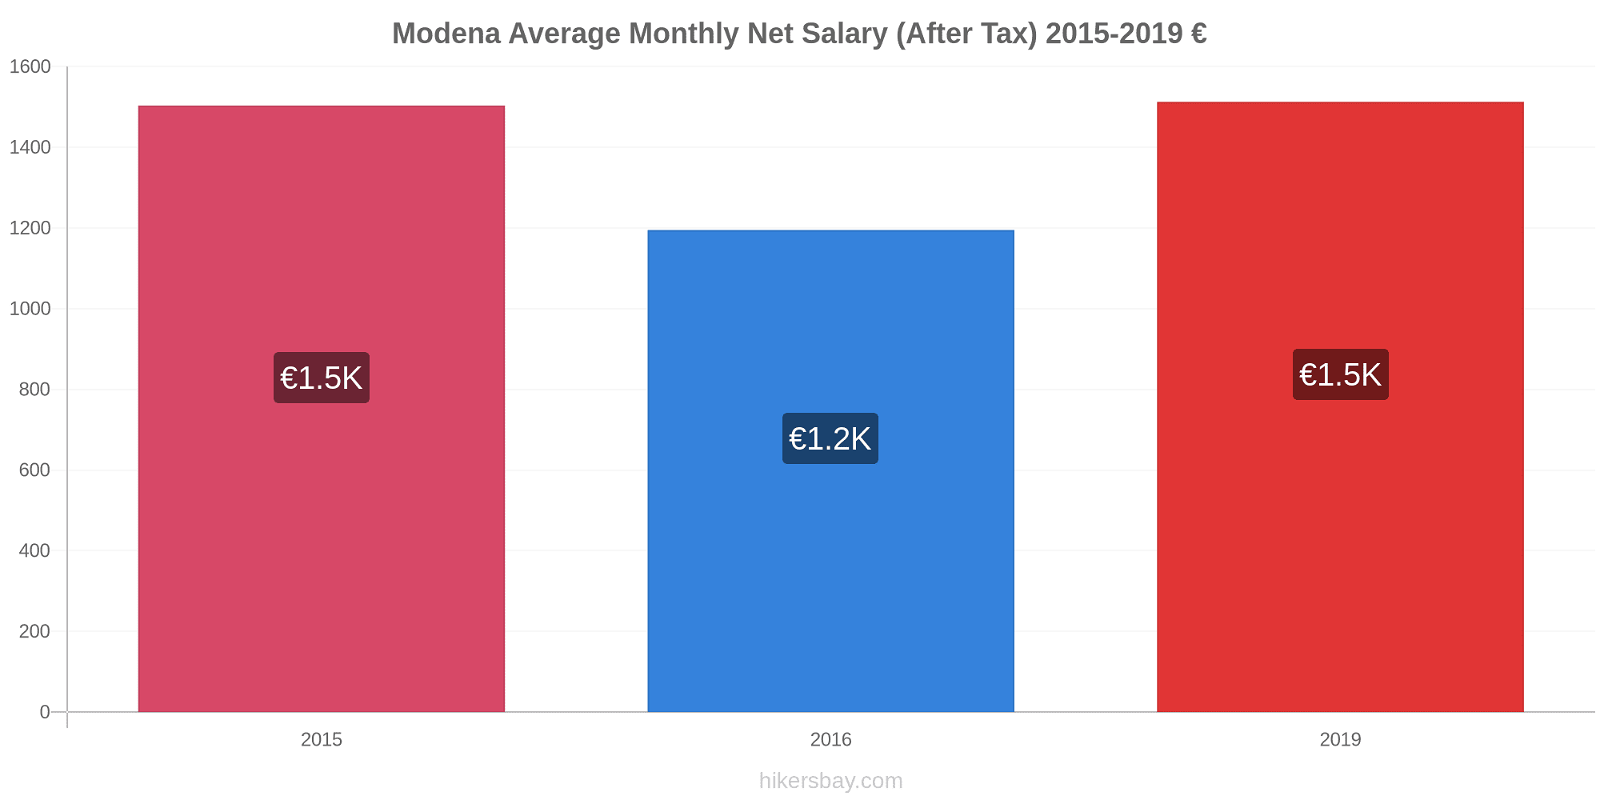 Modena price changes Average Monthly Net Salary (After Tax) hikersbay.com